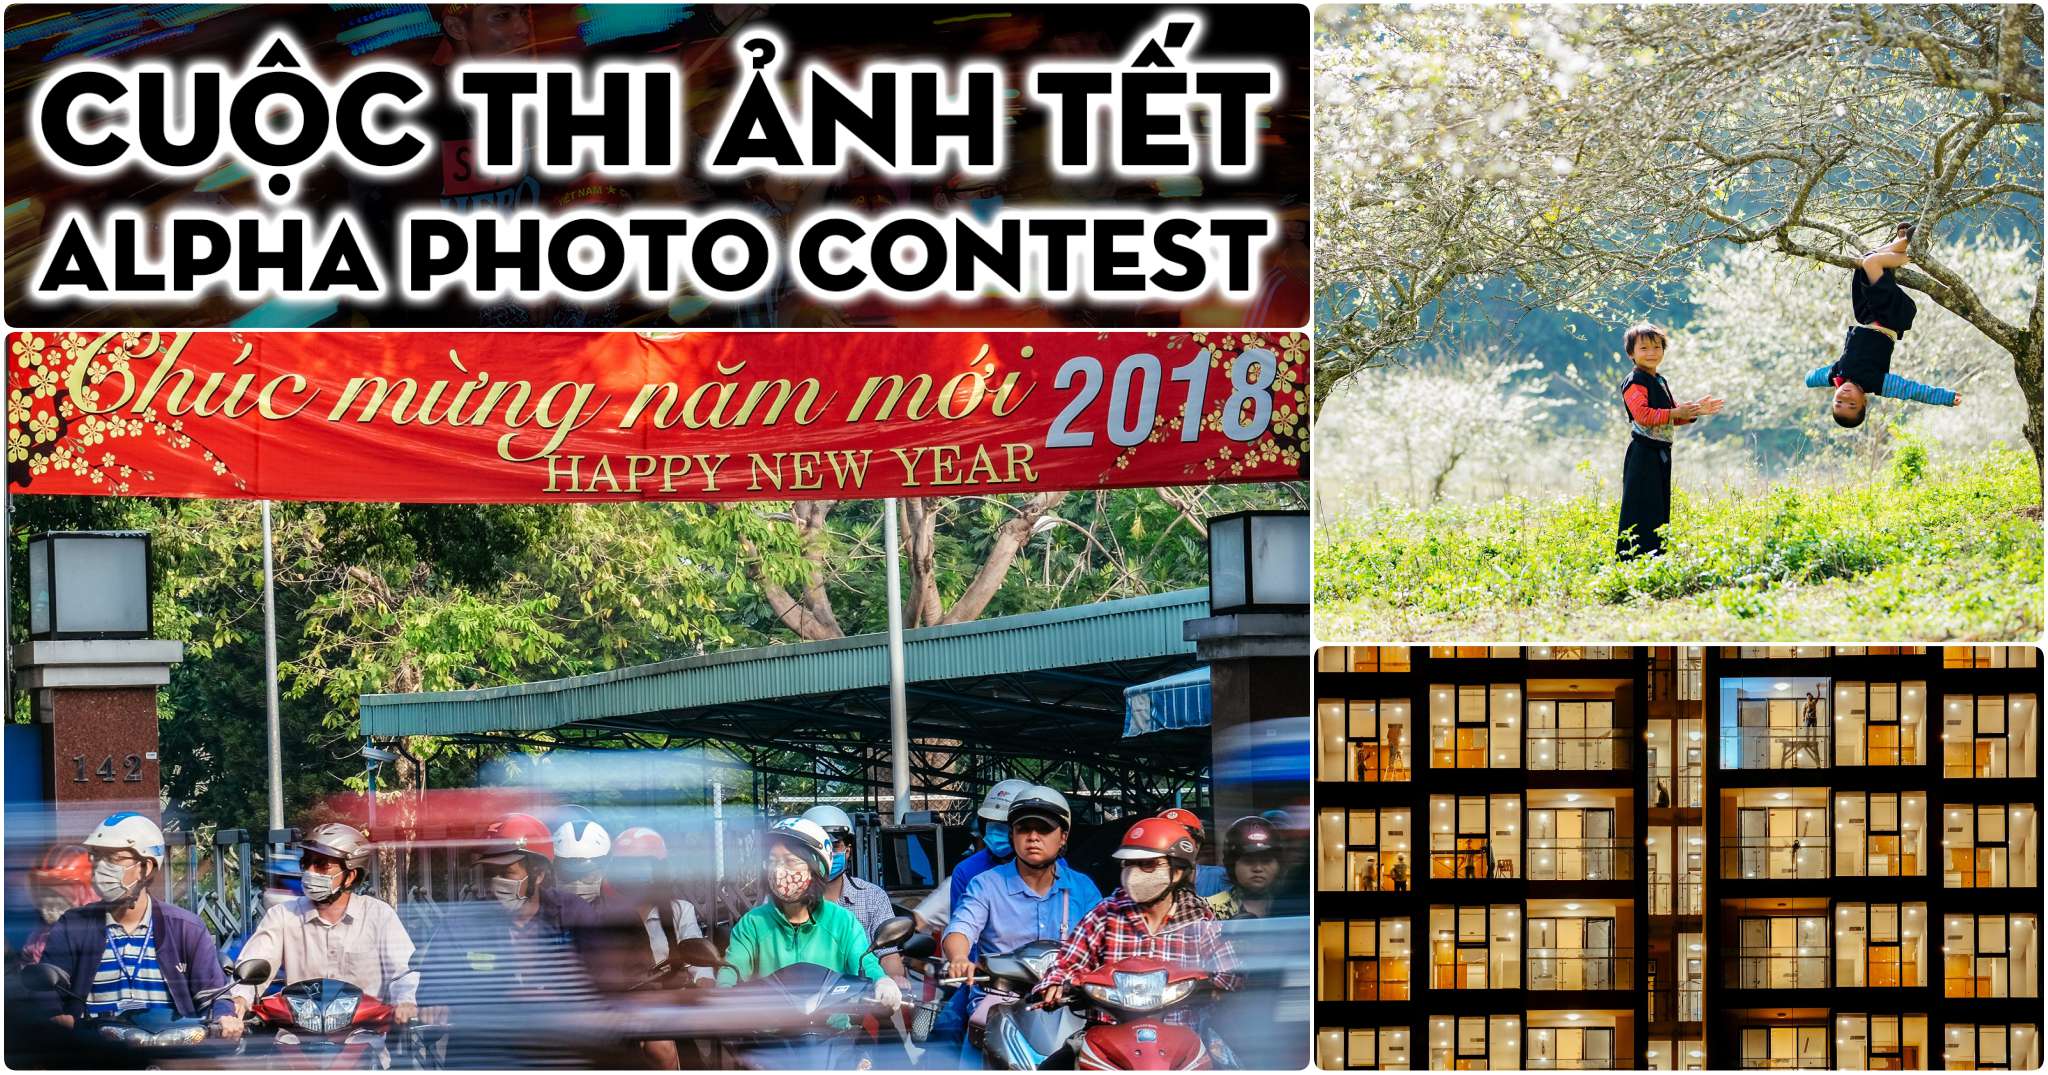 Photo of the Day (2/02), cuộc thi ảnh Tết Alpha Photo Contest